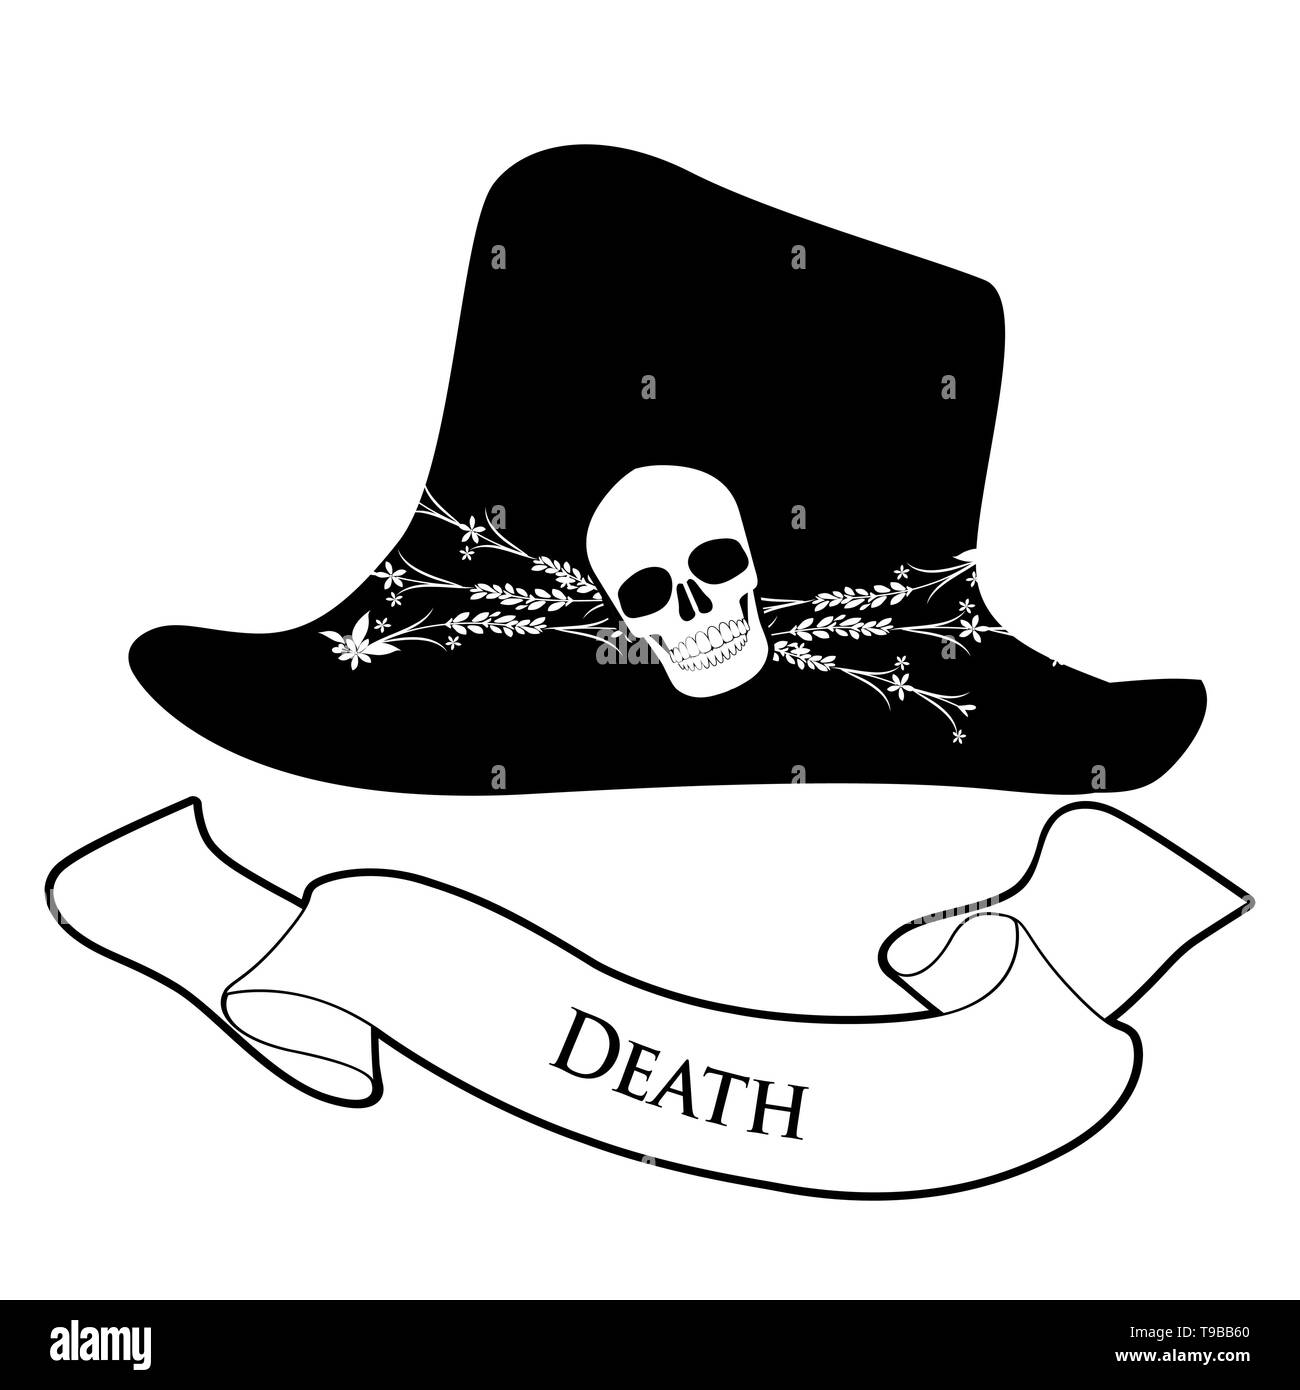 Tarot Card Concept. Death. Hat decorated with flowers, skull and text banner isolated on white background Stock Vector